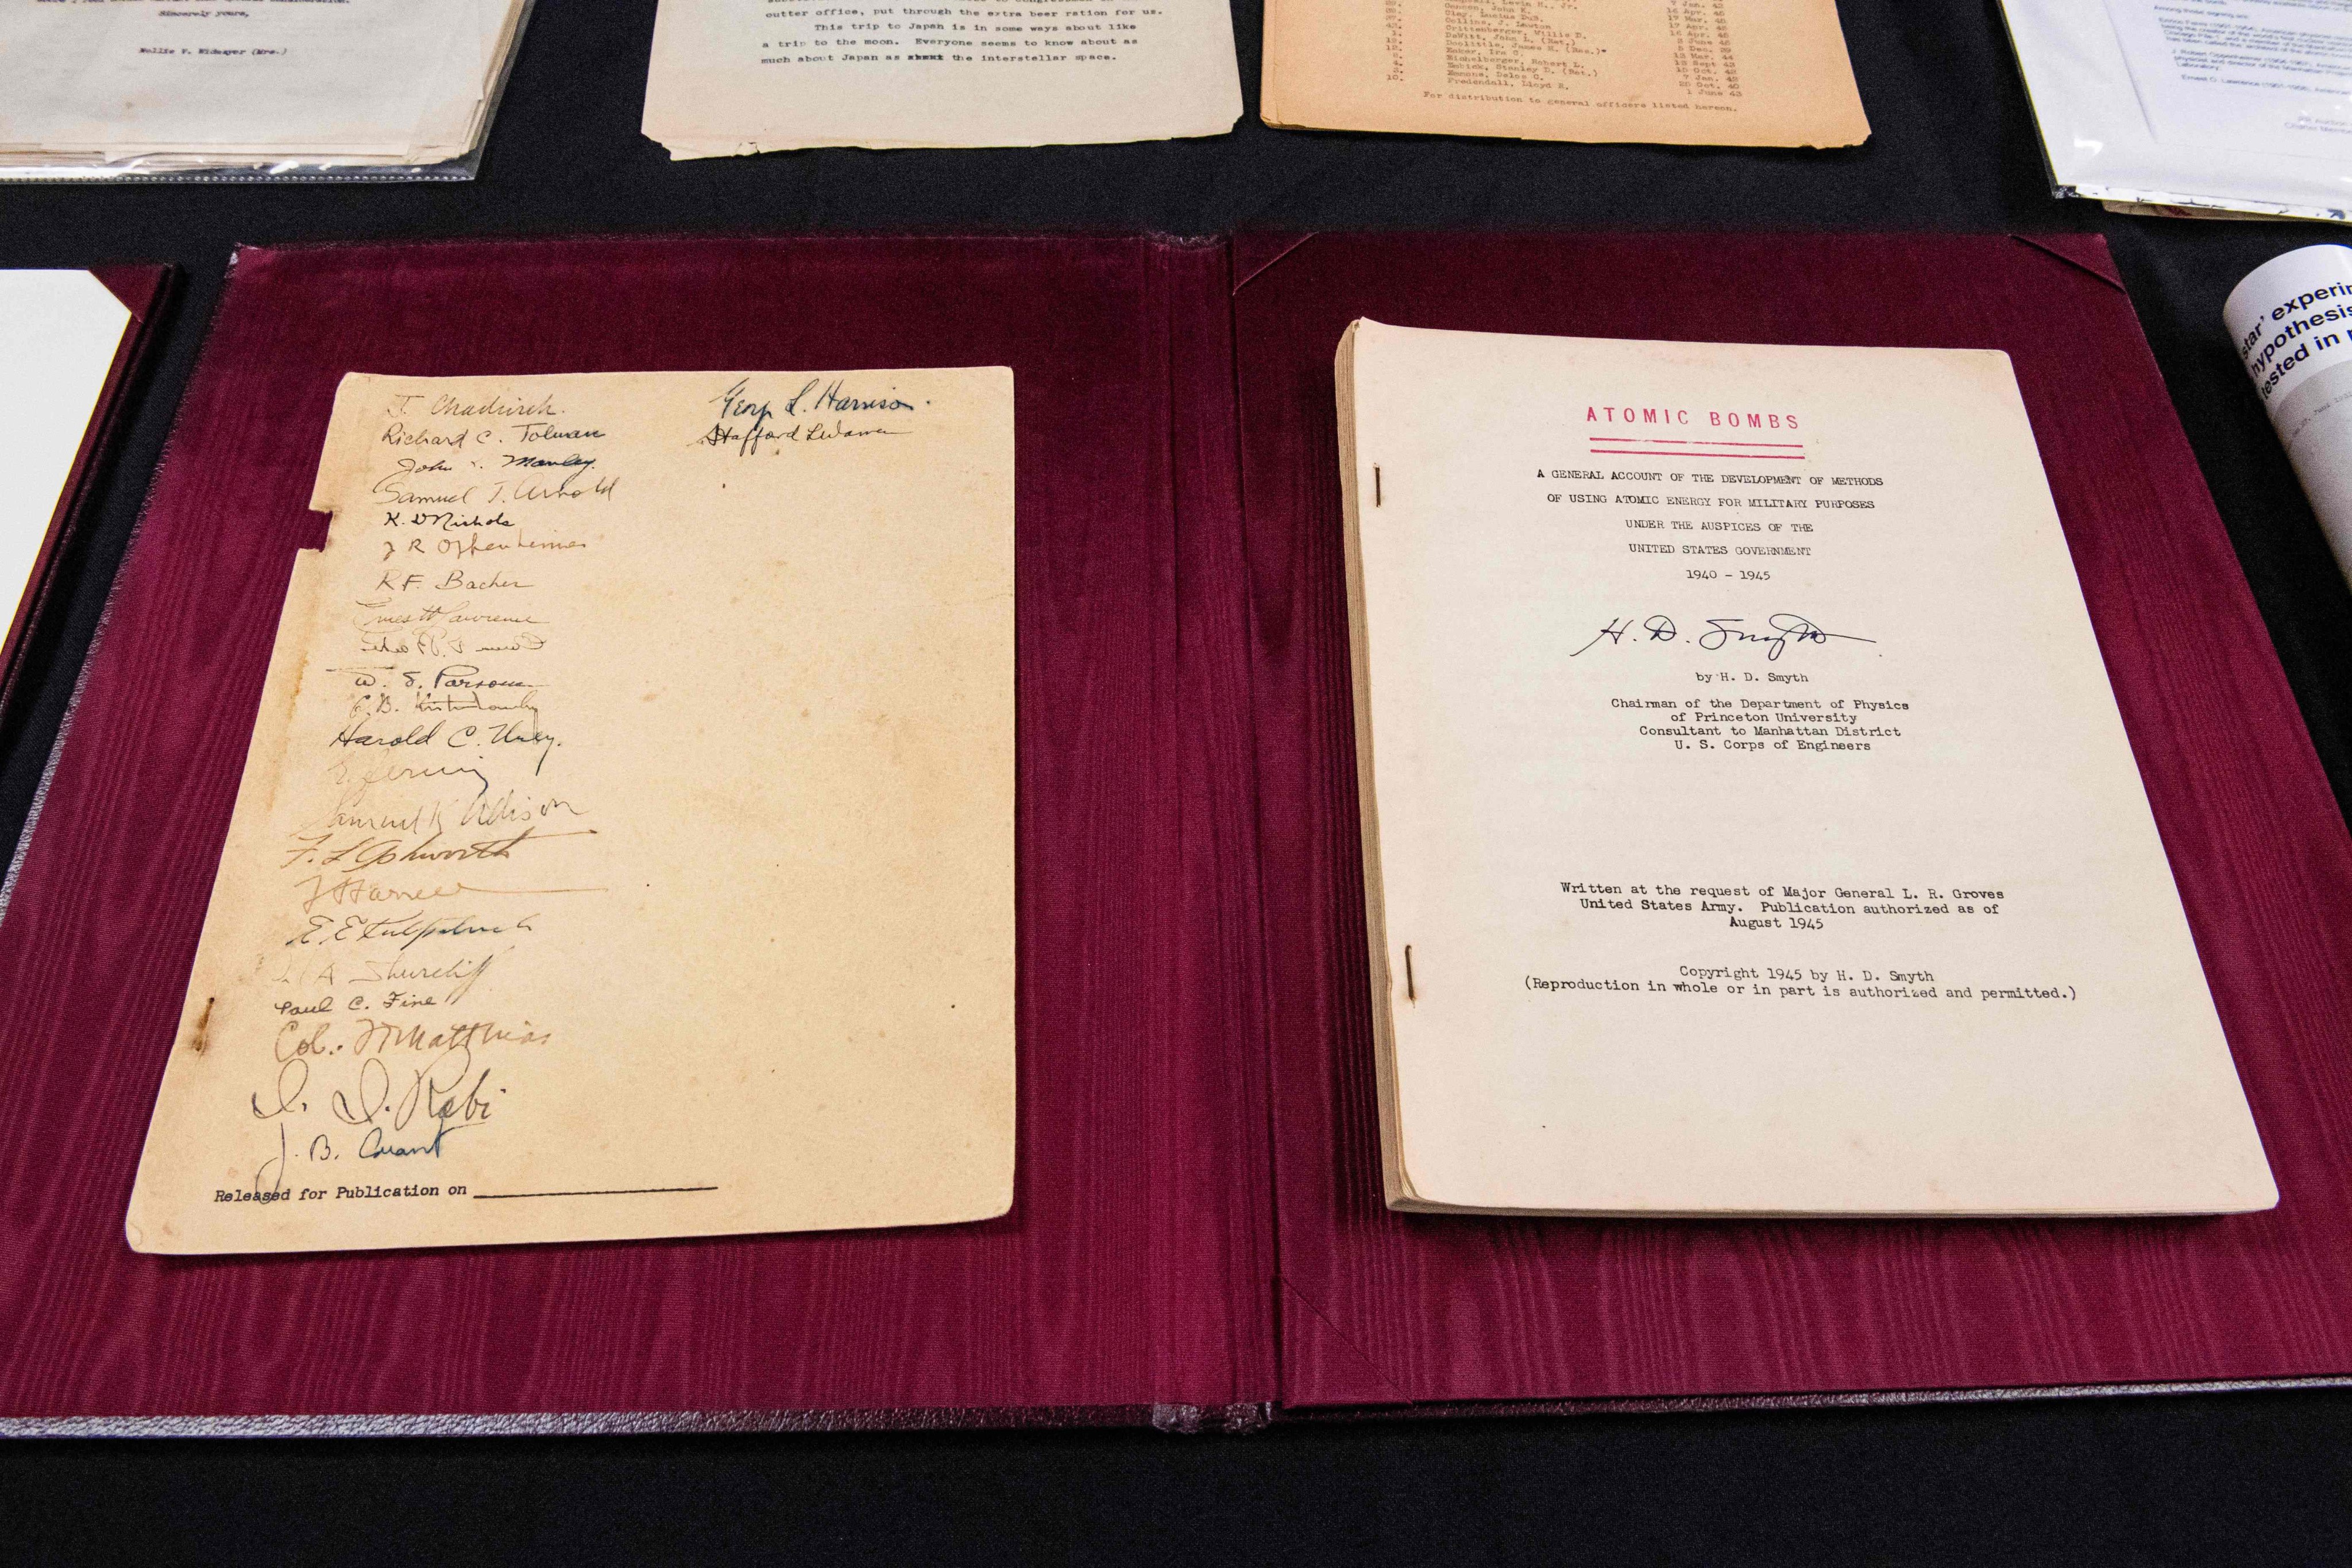 Items related to the US atomic bomb programme, some signed by J. Robert Oppenheimer and others, are displayed at the RR Auction House in Boston. Photo: AFP 